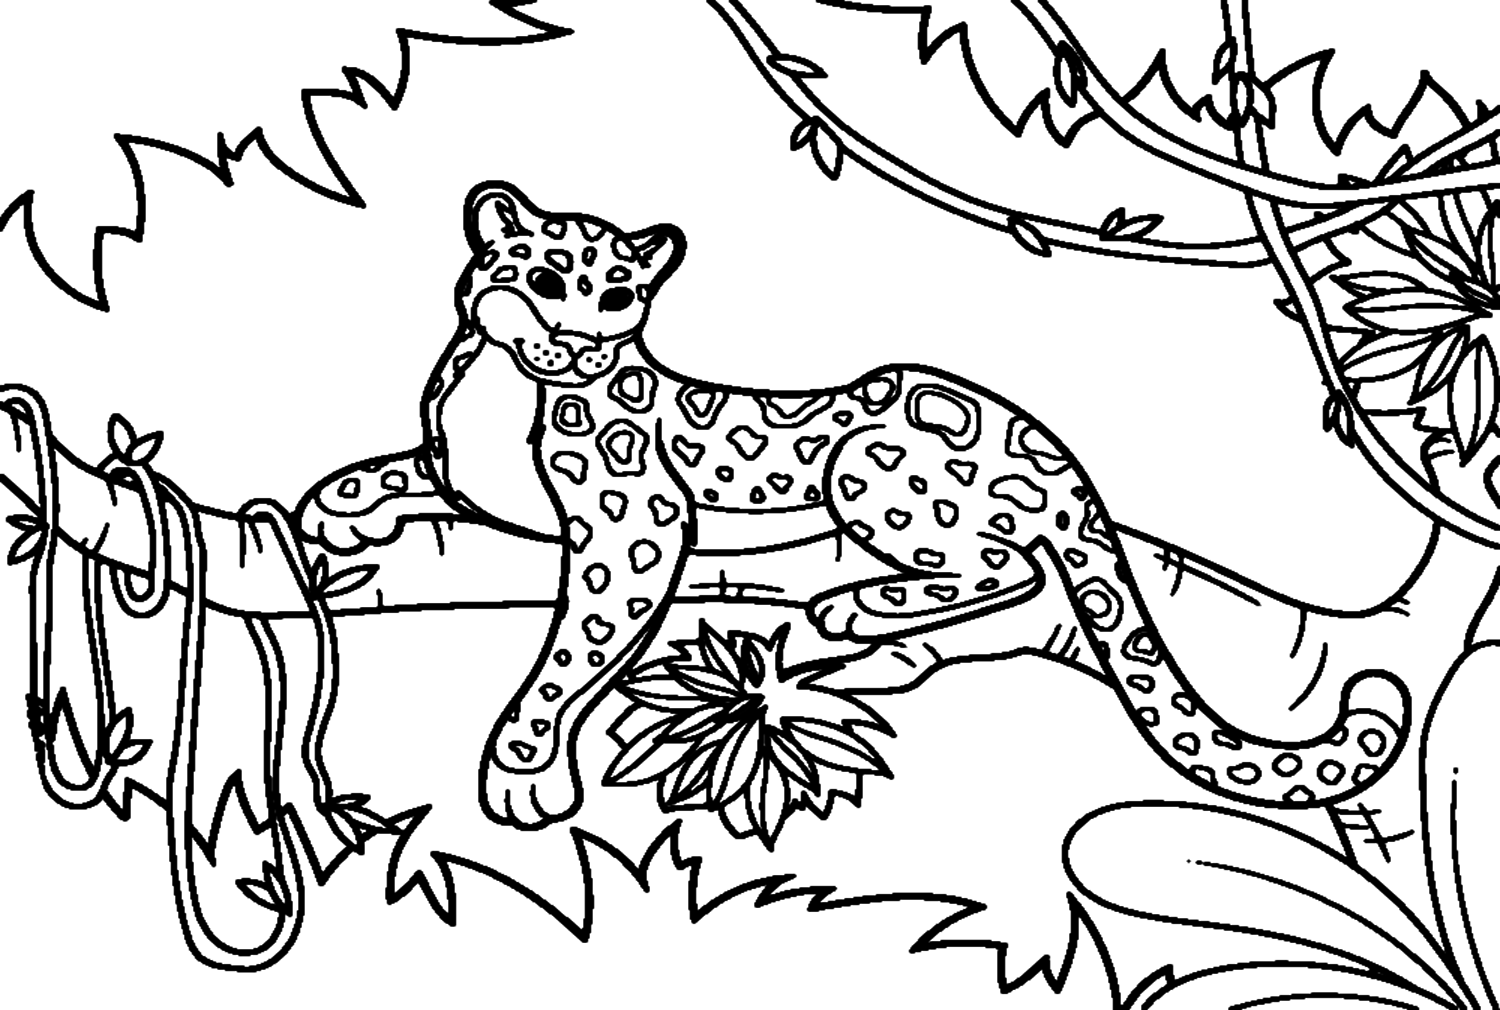 Africa Leopard Lying On Tree Branch Coloring Pages - Leopard Coloring ...